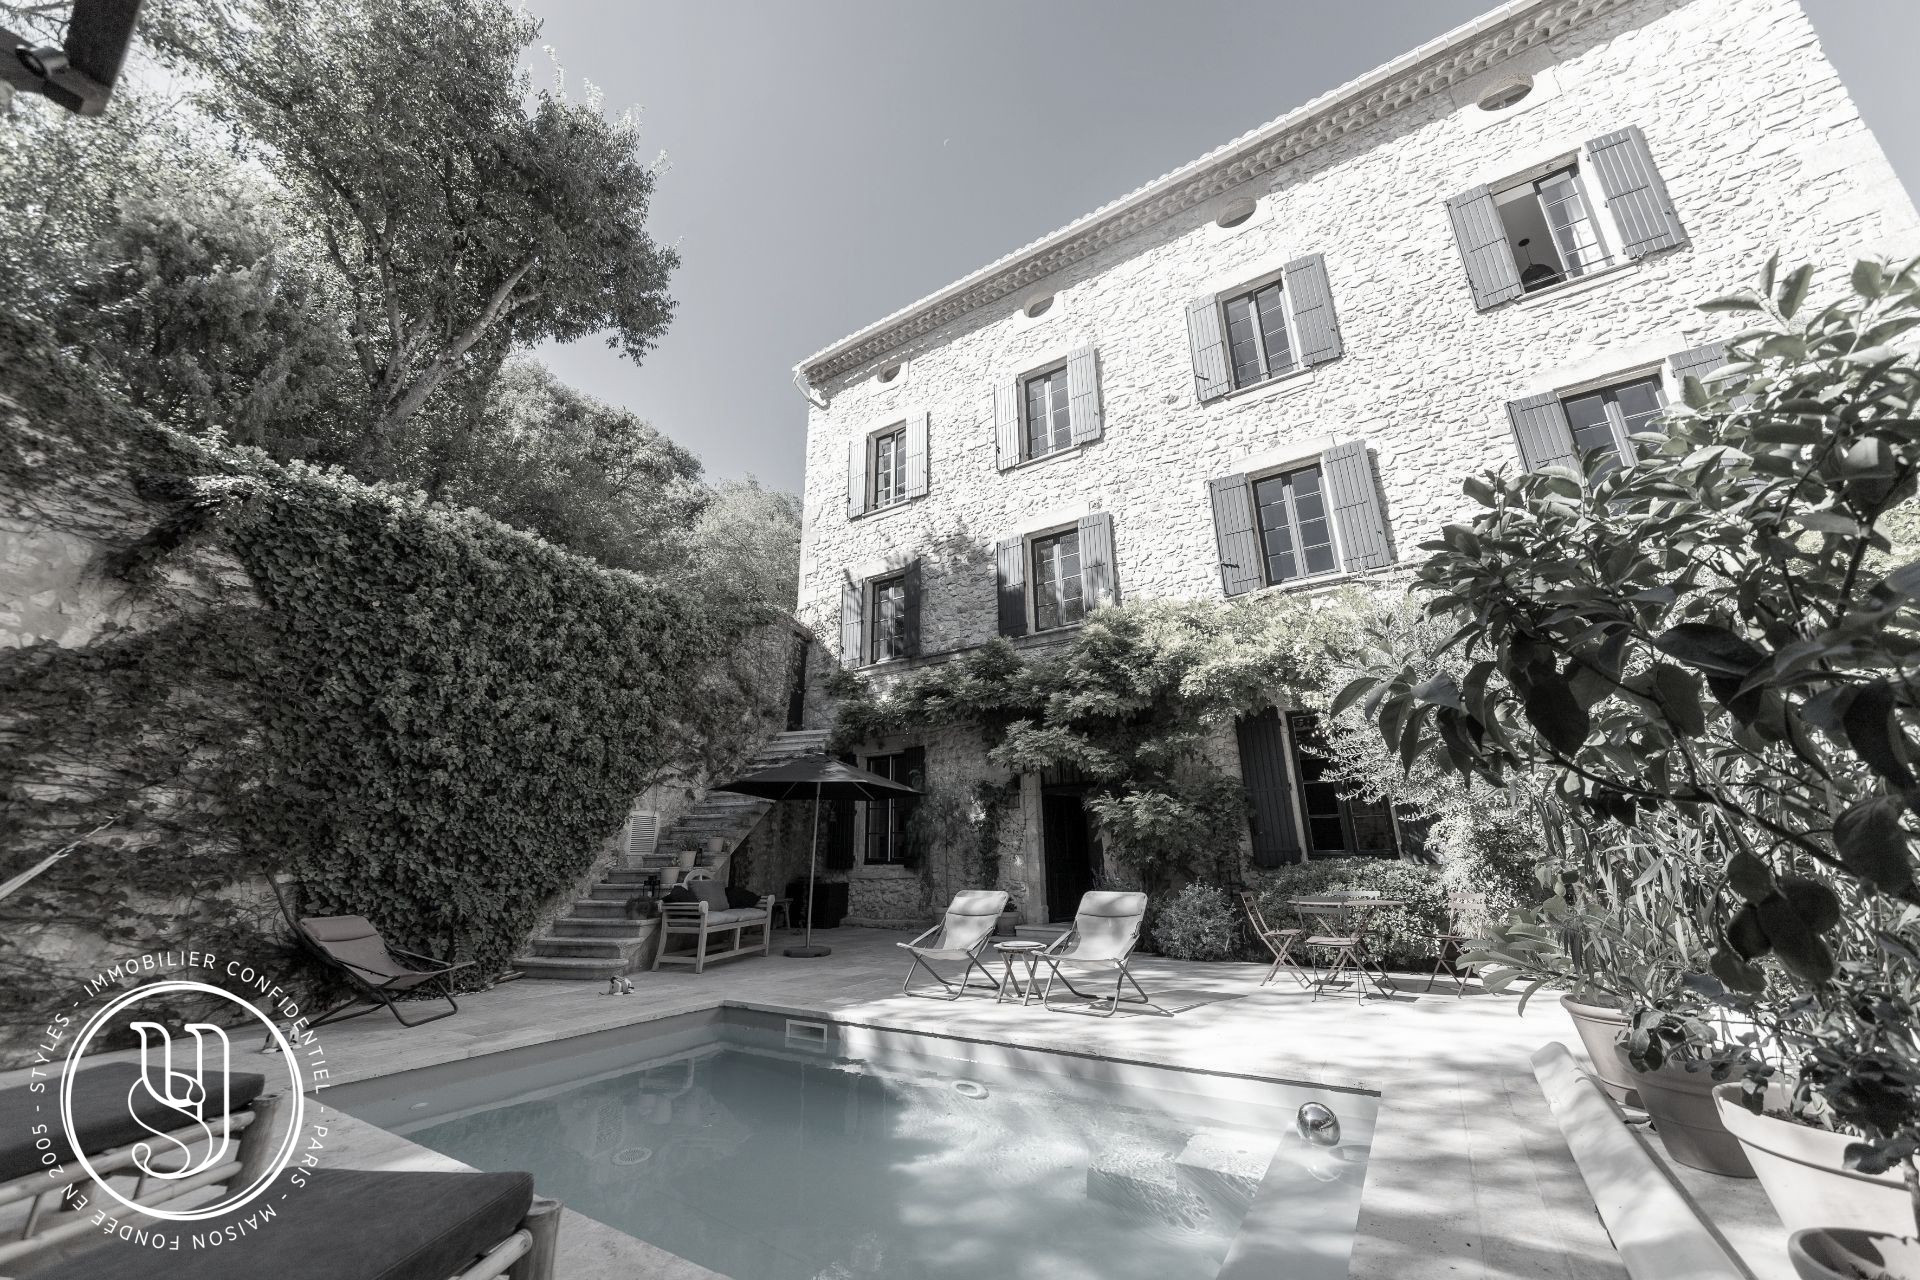 Uzes - surroundings, sold by S T Y LE S, a beautiful, refined and ele - image 1